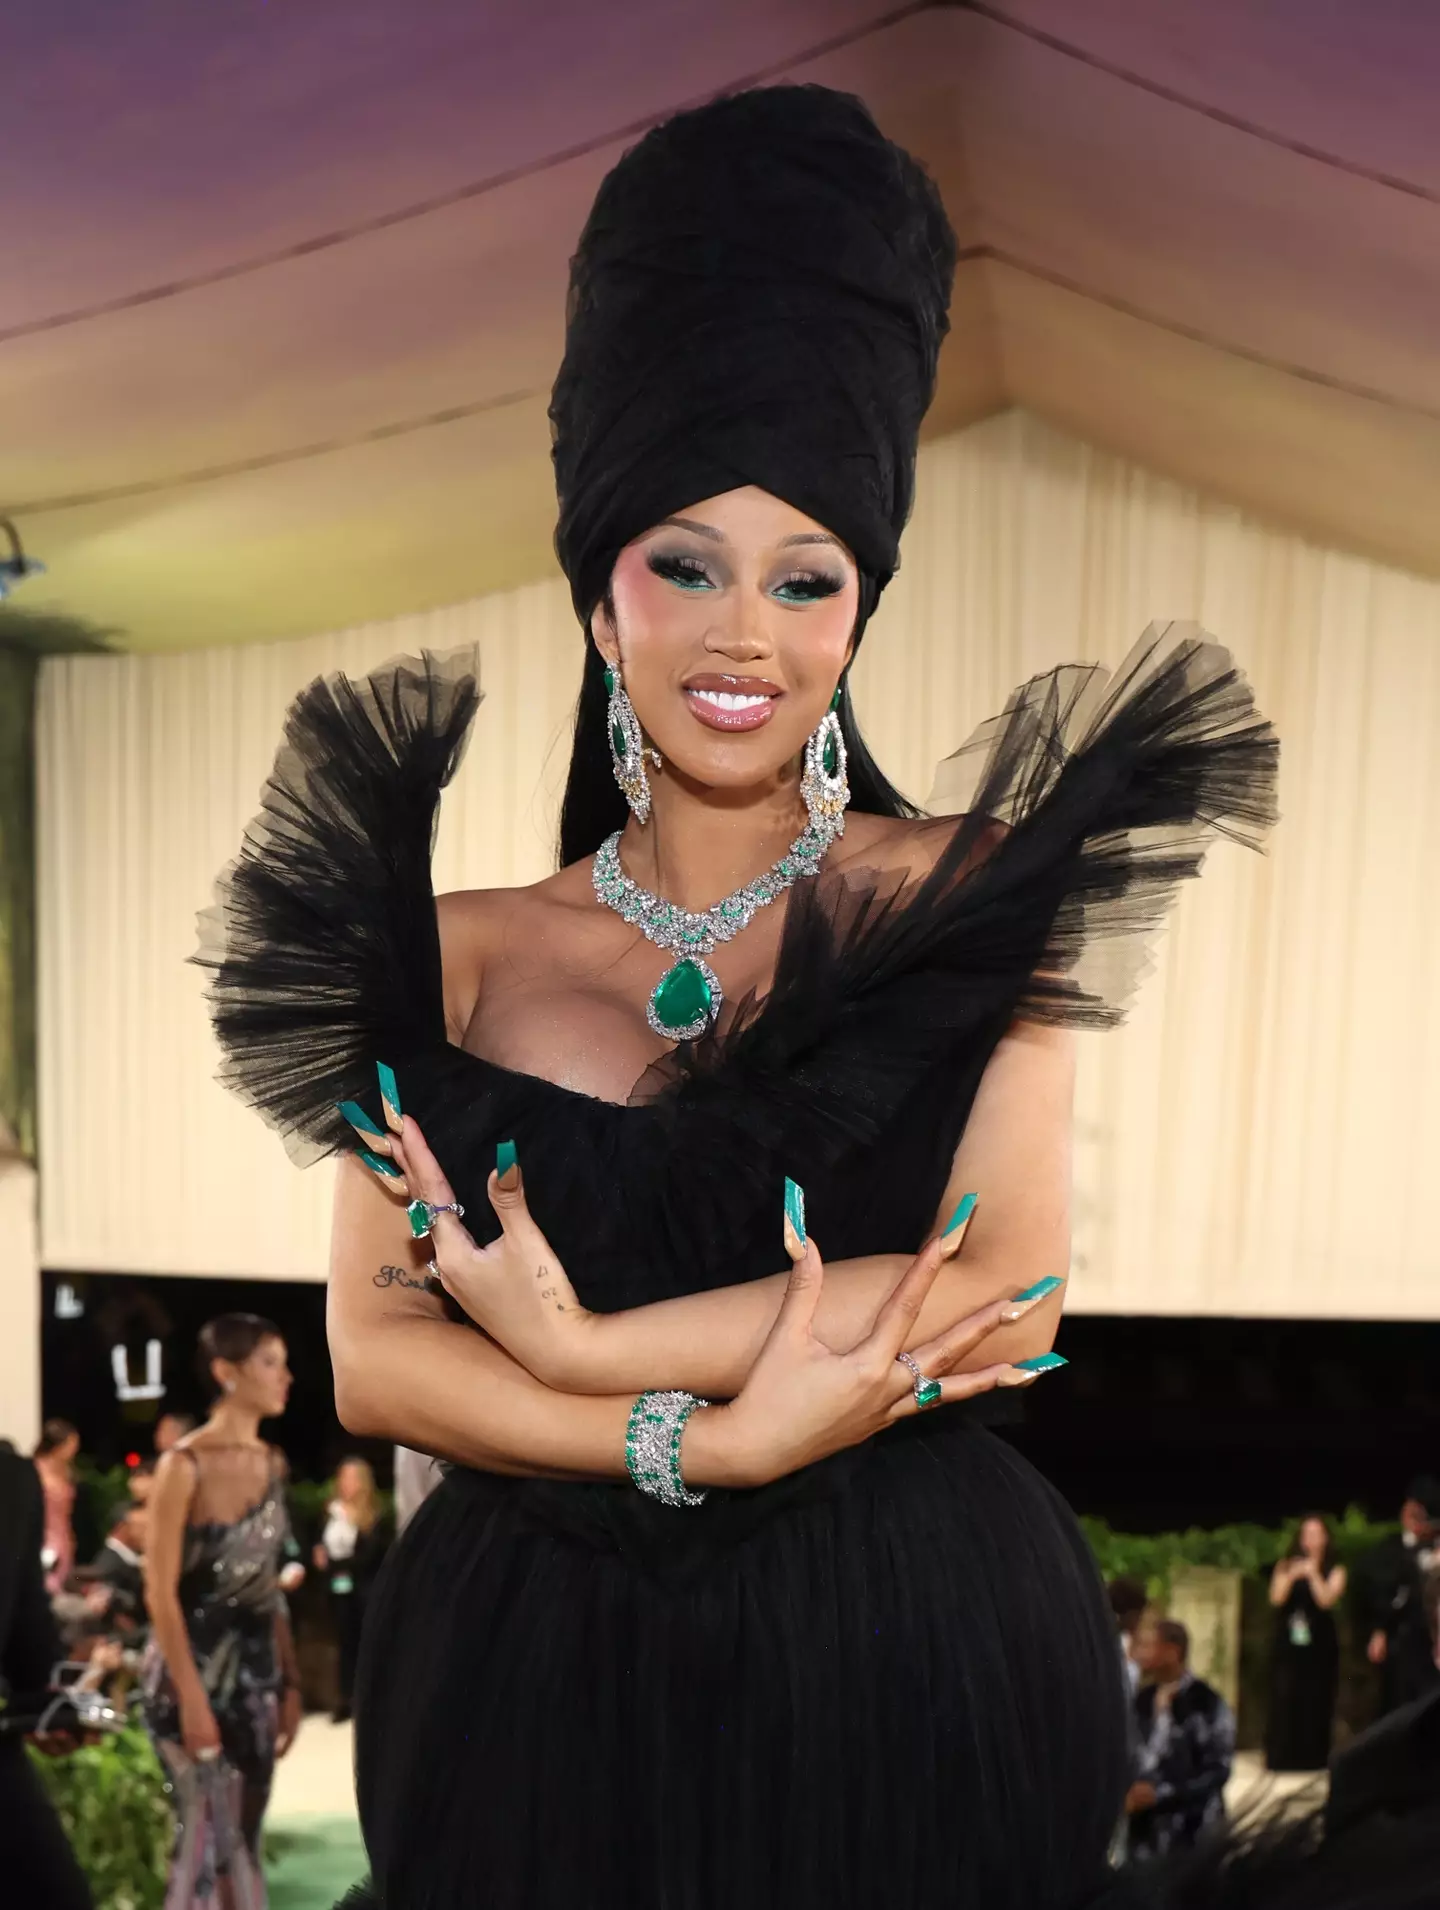 Cardi B has defended herself (Kevin Mazur/MG24/Getty Images for The Met Museum/Vogue)